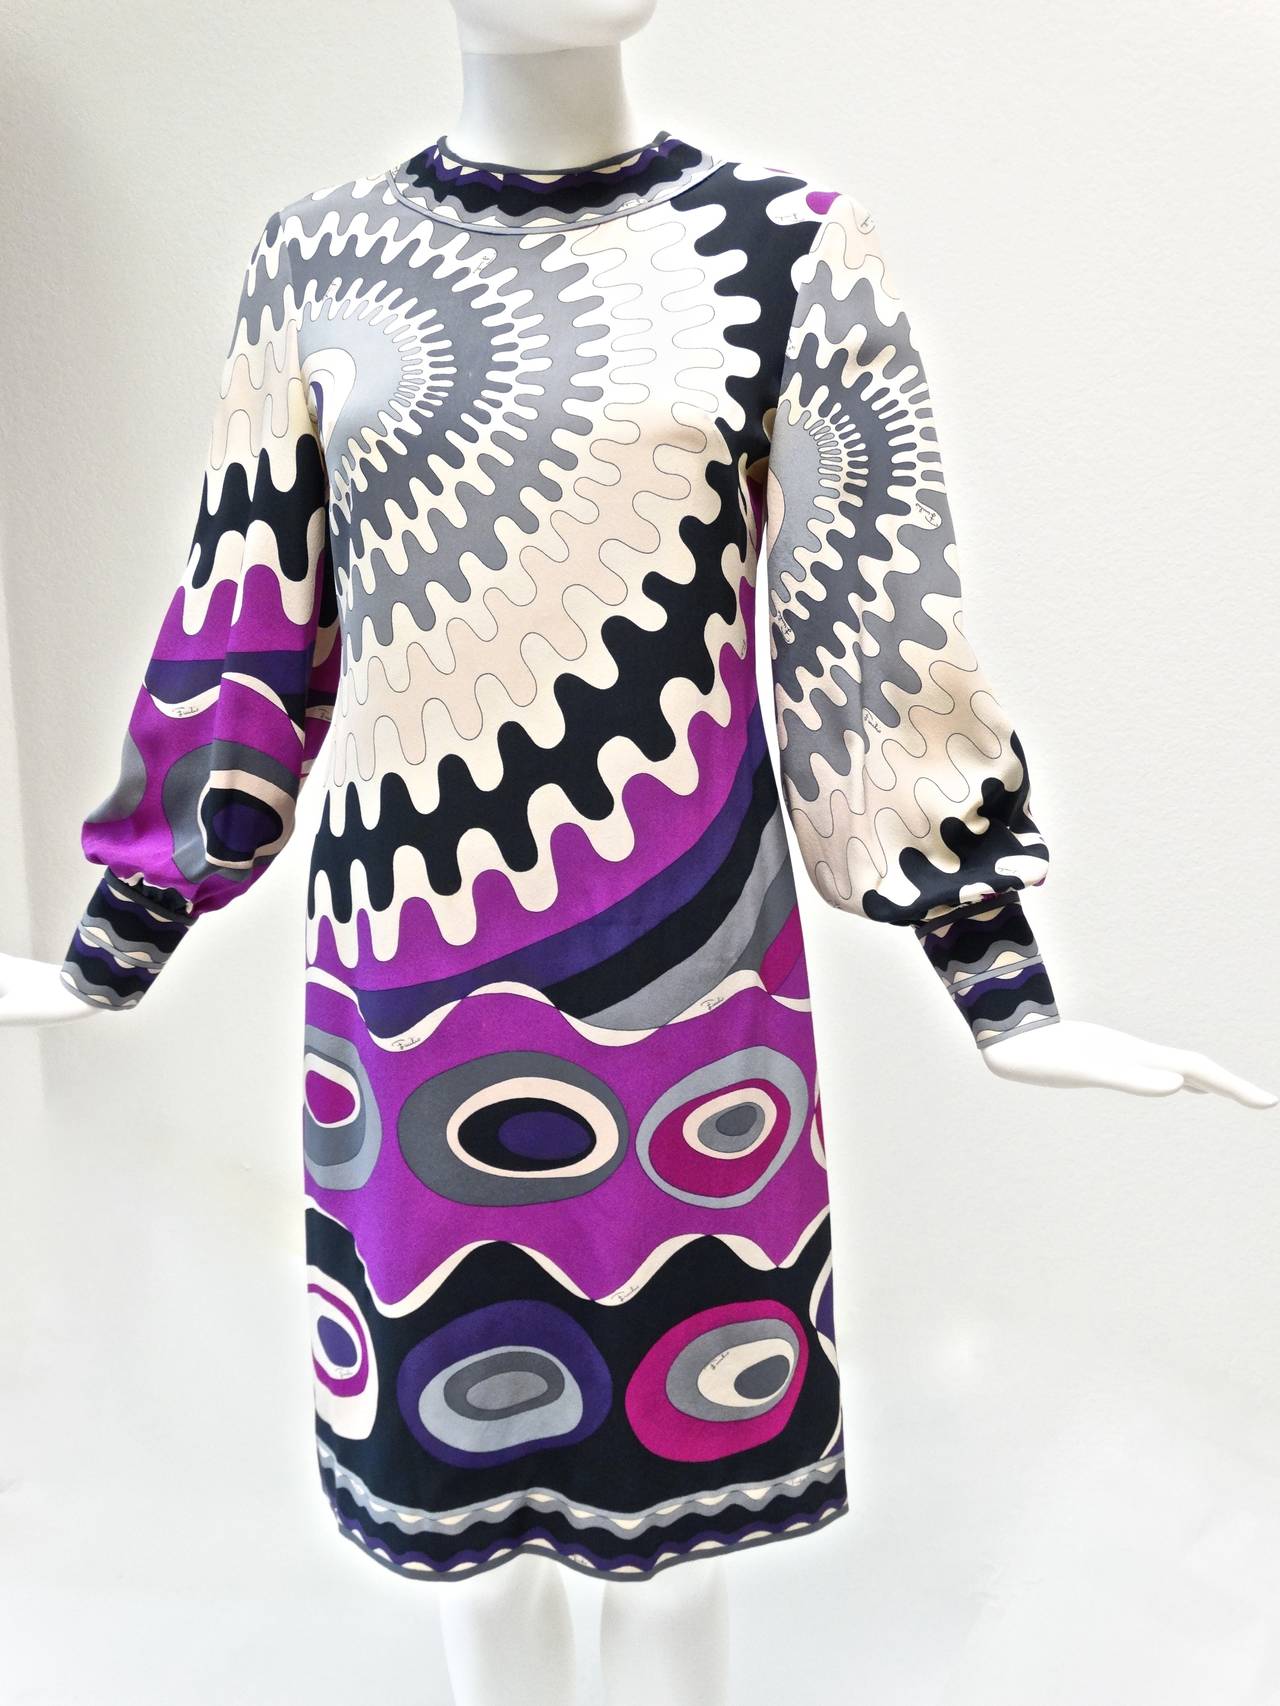 Fantastic 1960’s Pucci long sleeve dress is made from silk crepe chiffon printed with an iconic psychedelic graphic in shades of violet, fuchsia, grey, black, beige  and white. Dress sleeves are banded with 3 small snap buttons.  Dress has a metal